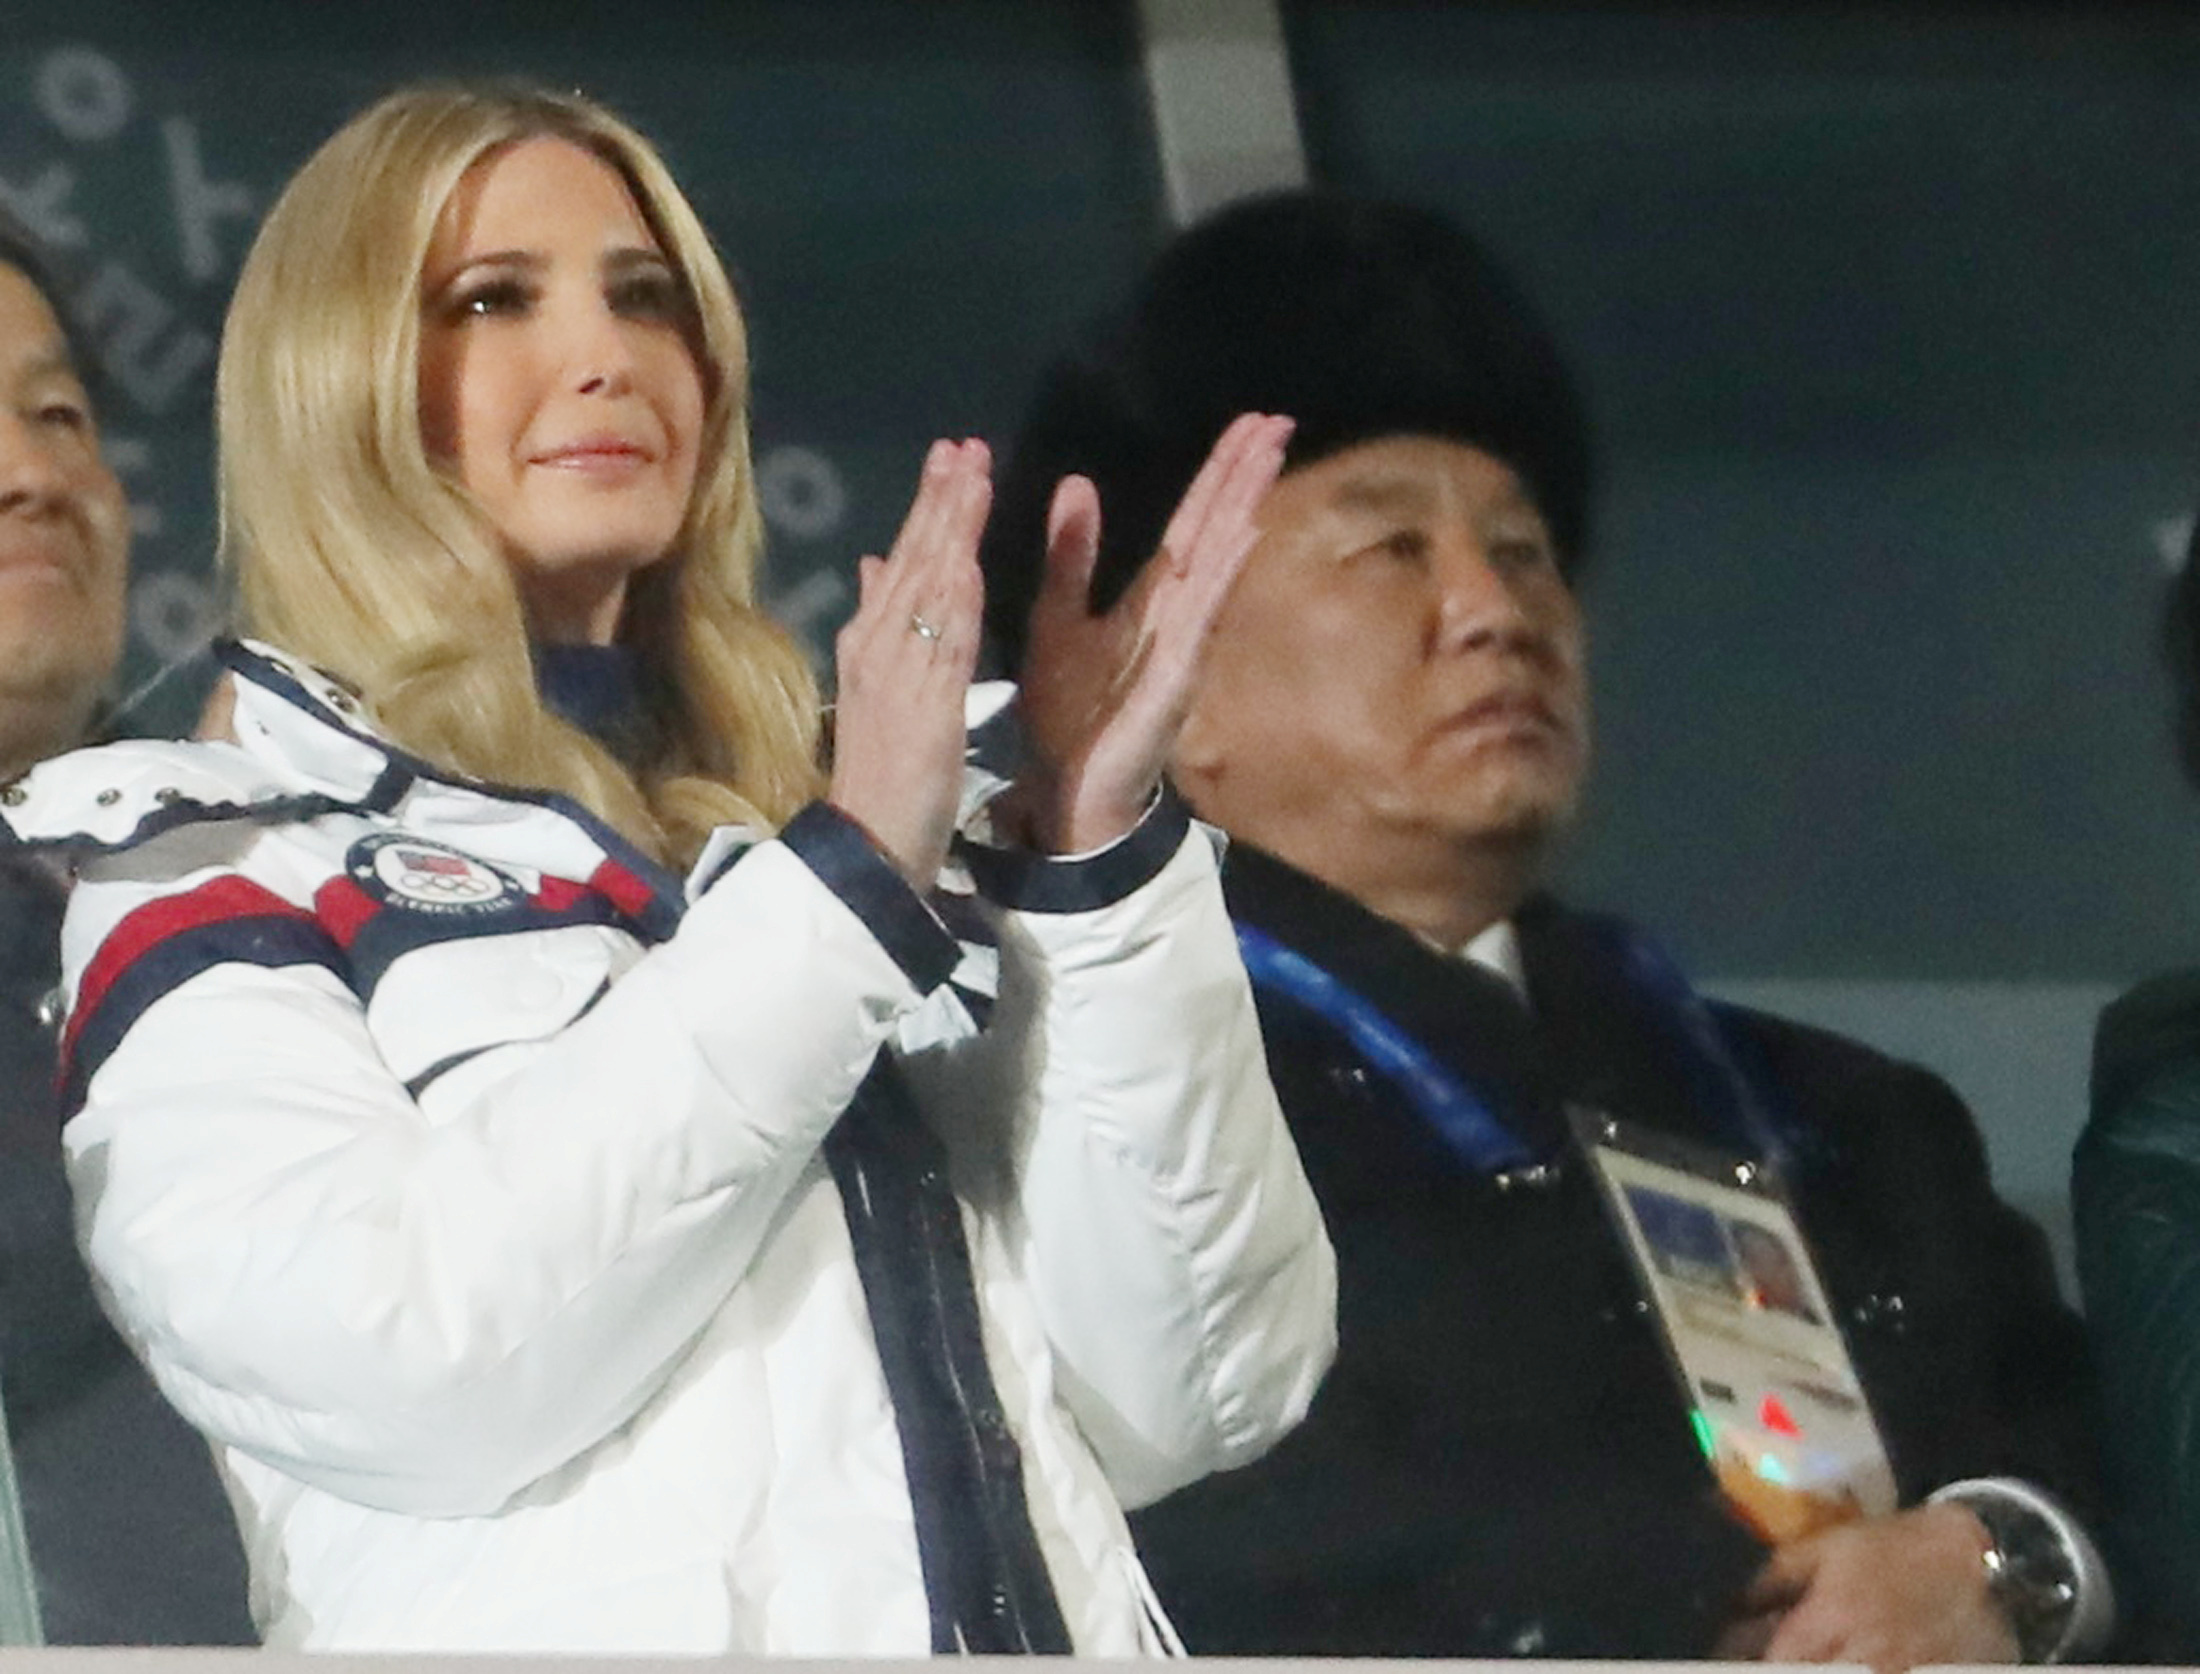 Ivanka Trump and Kim Yong Chol of the North Korea delegation attend the closing ceremony of the Pyeongchang 2018 Winter Olympics. (Lucy Nicholson—Reuters)